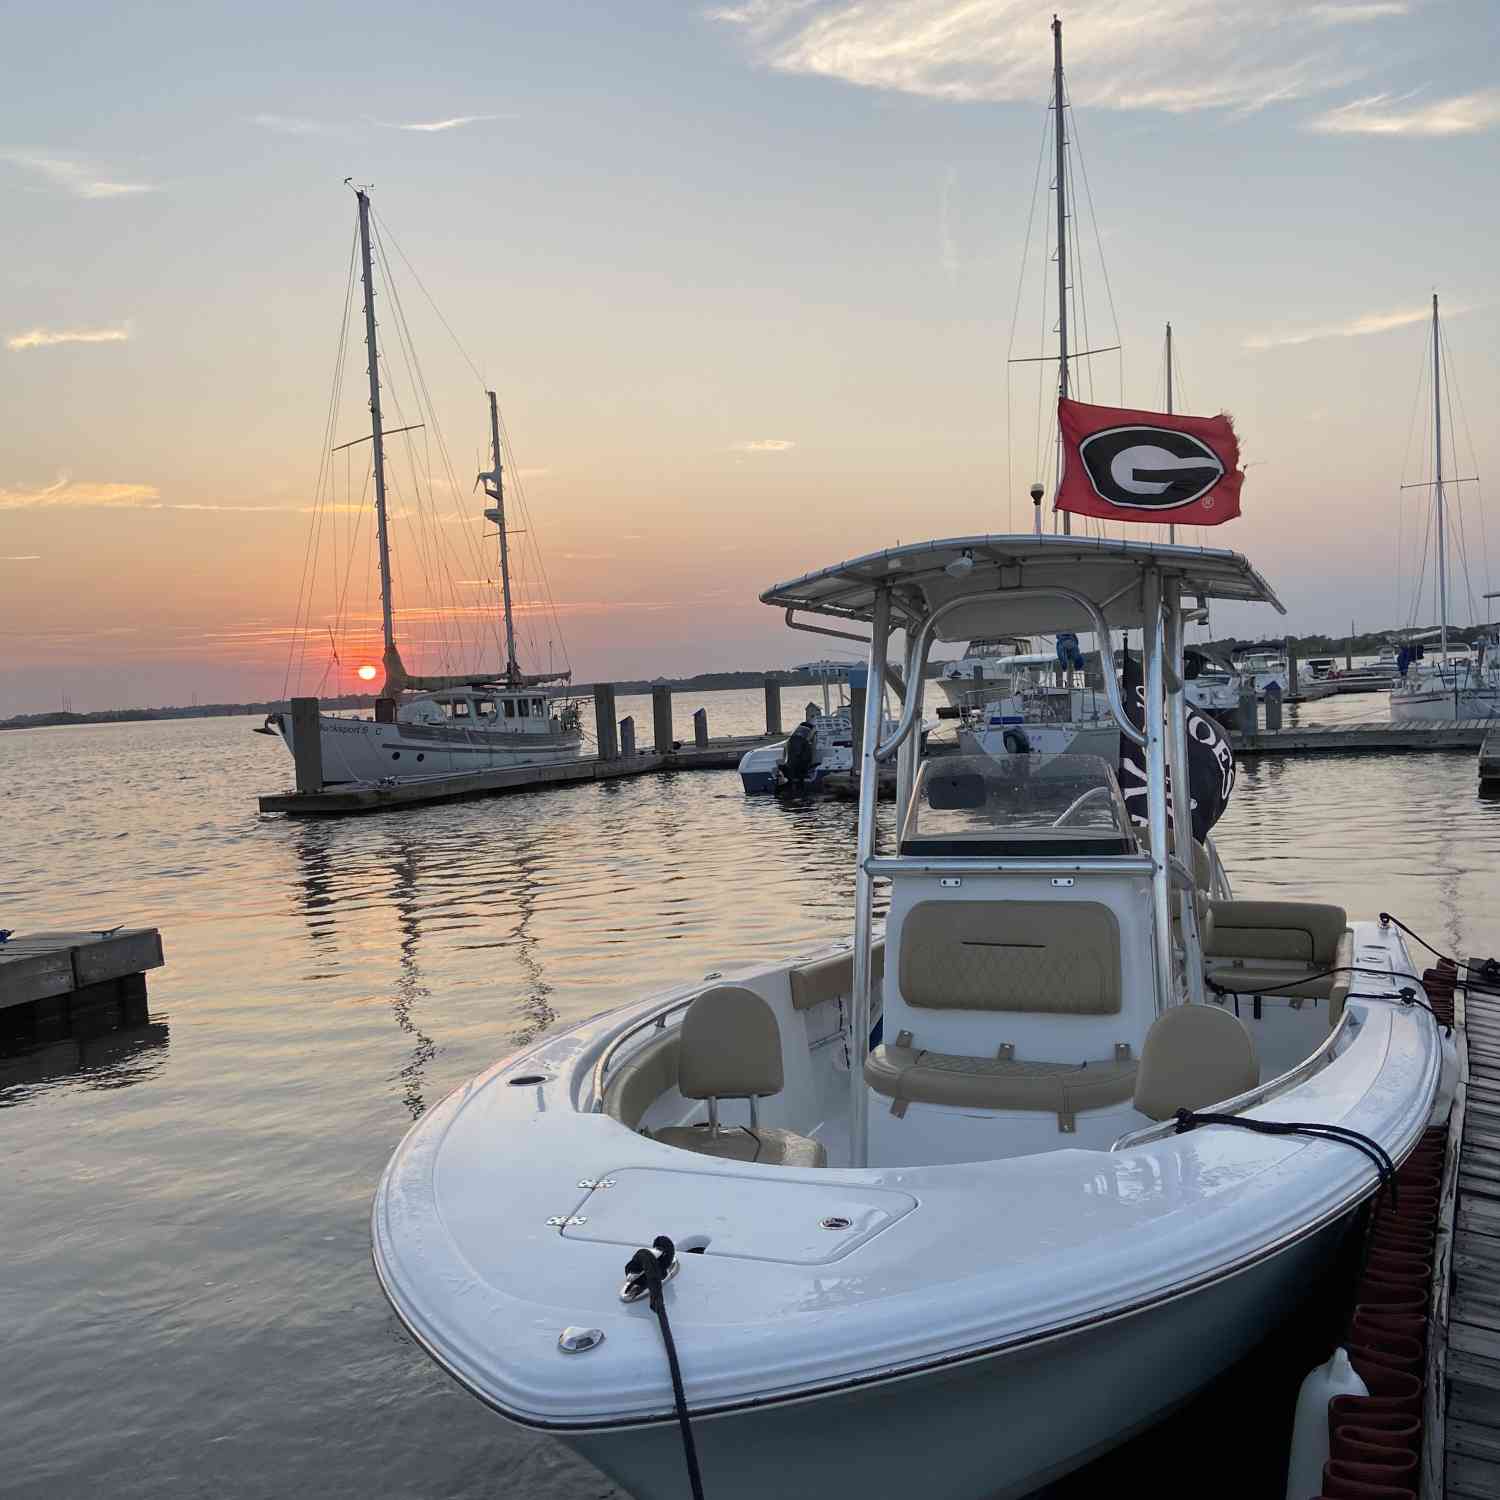 Title: Sunset from the Cove - On board their Sportsman Heritage 211 Center Console - Location: Dolphin Cove Marina. Participating in the Photo Contest #SportsmanJune2021